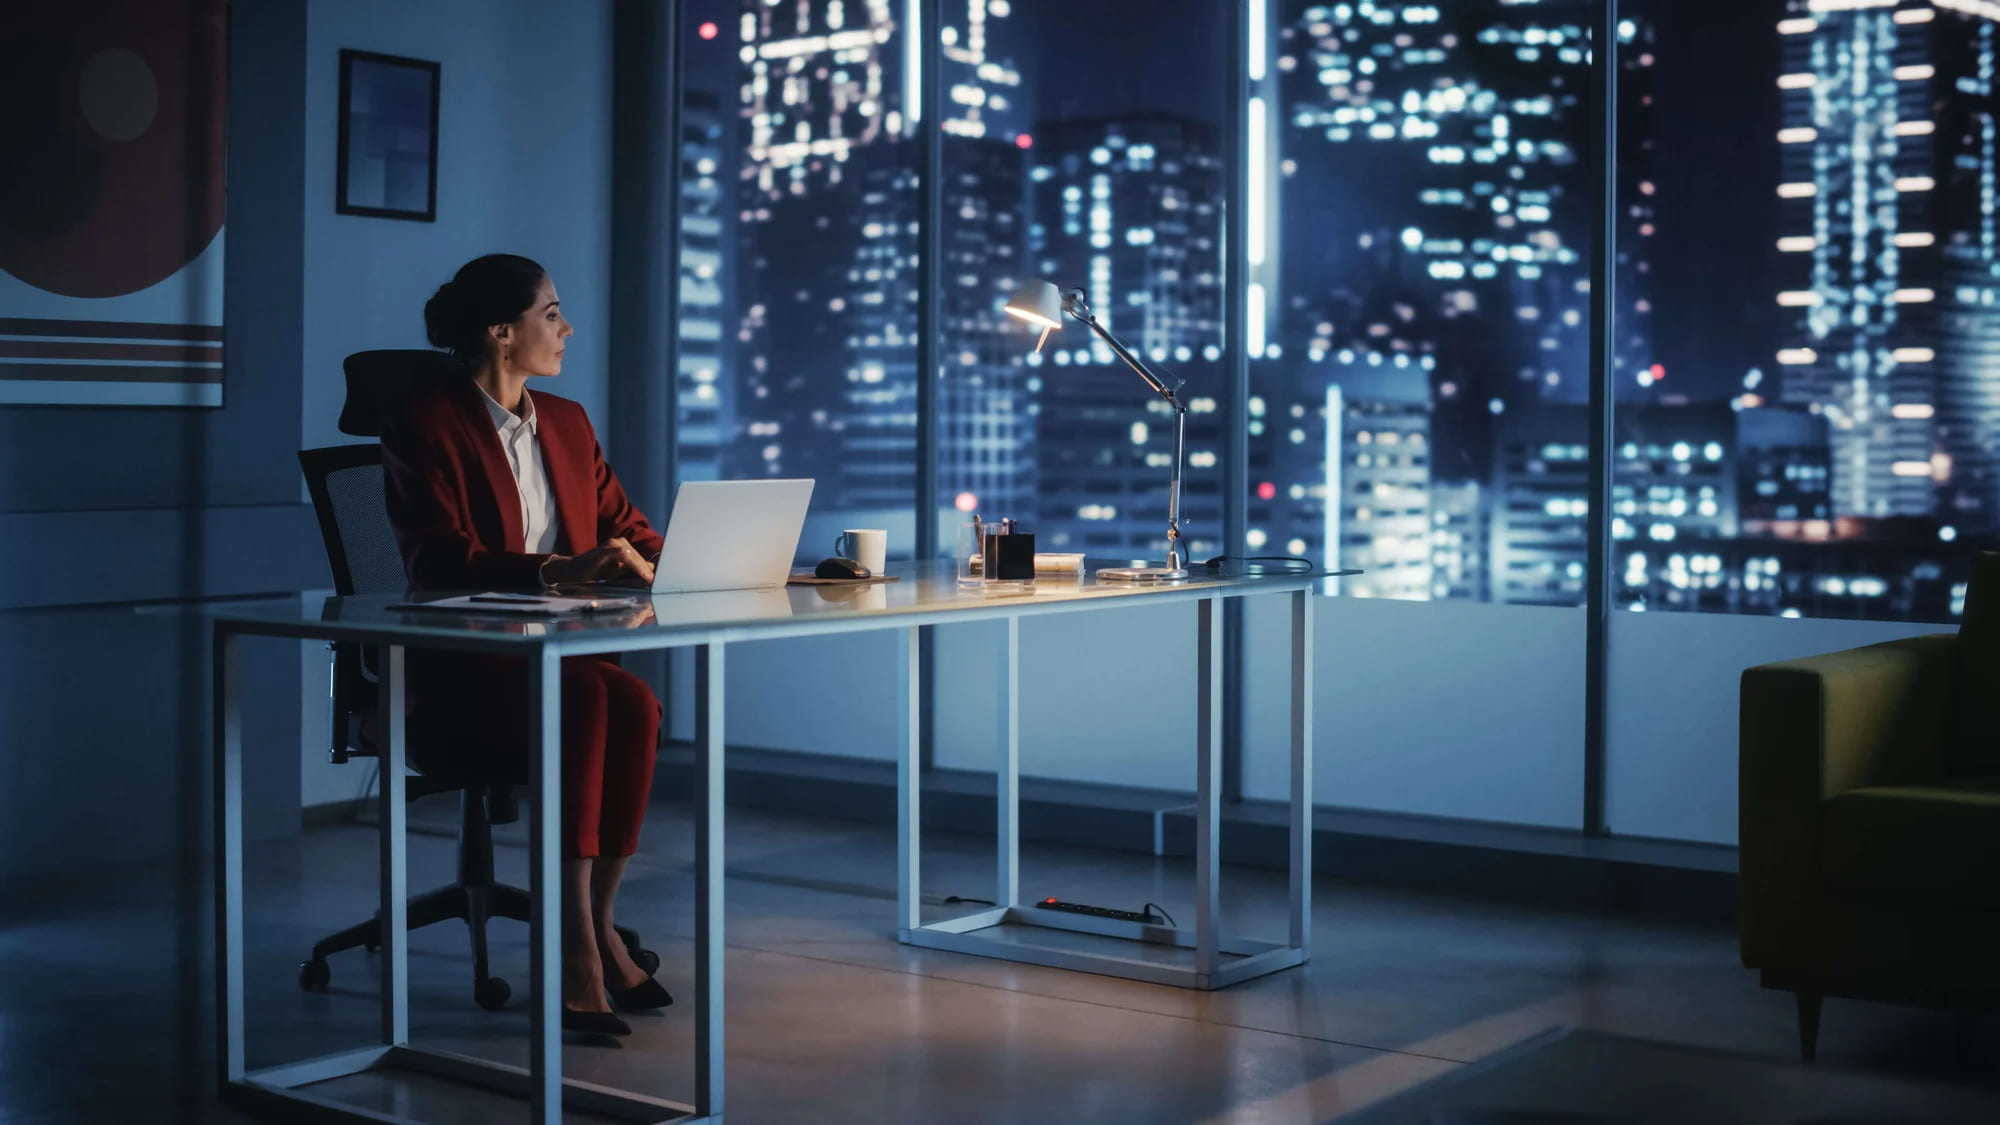 A business woman working at her desk at night.